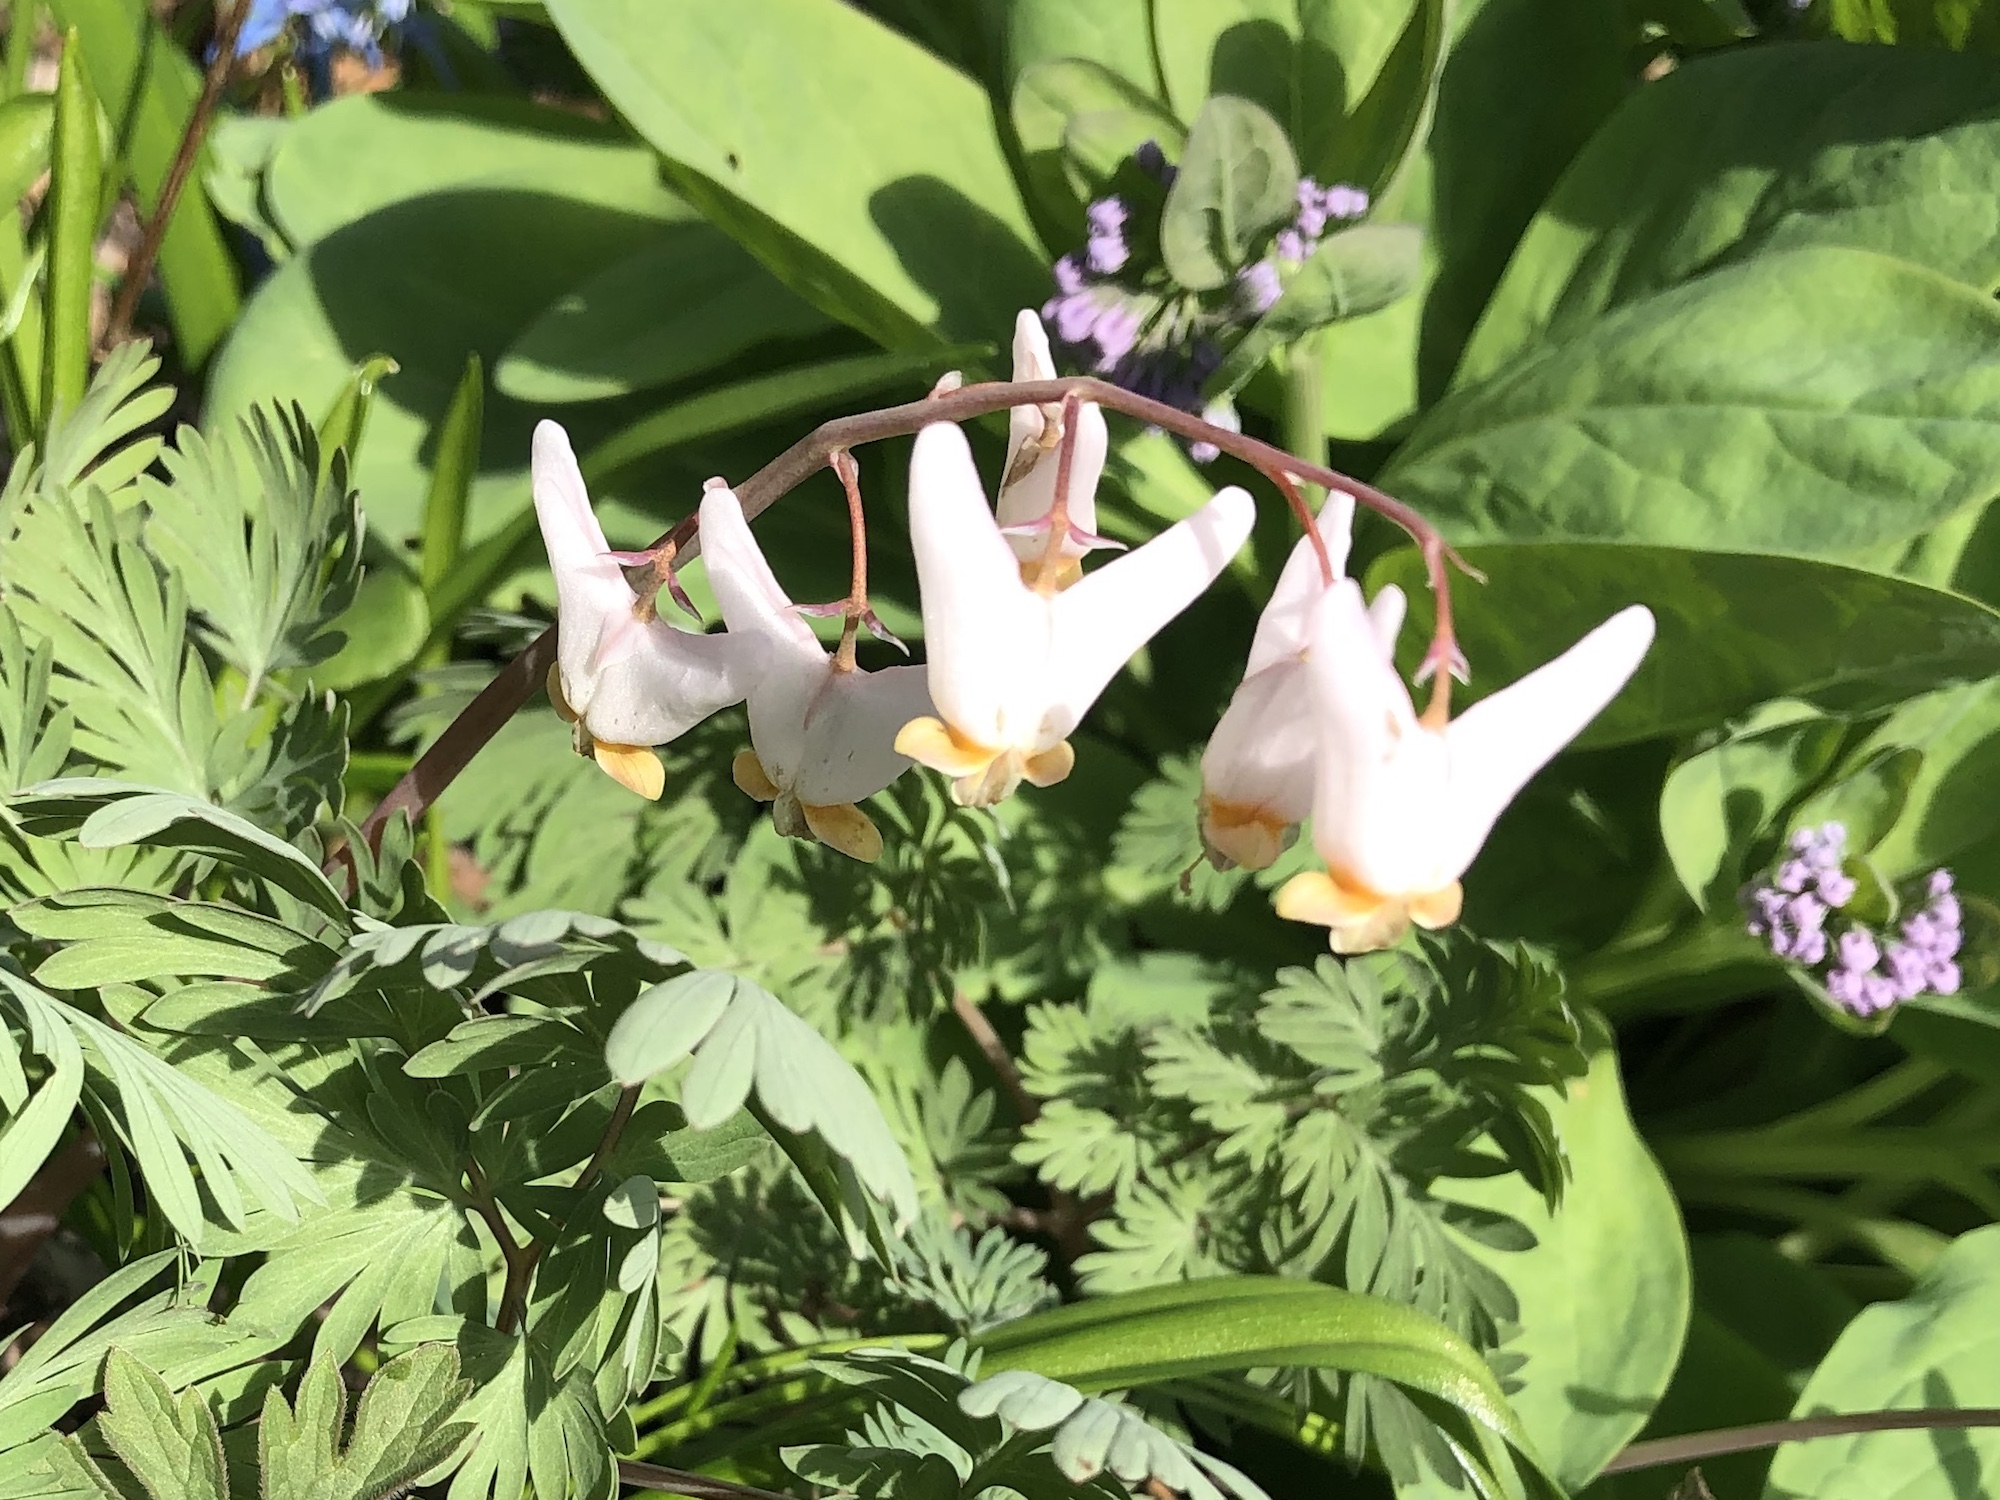 Dutchman's Breeches photo taken on April 21, 2019 in Madison, Wisconsin by Duck Pond.